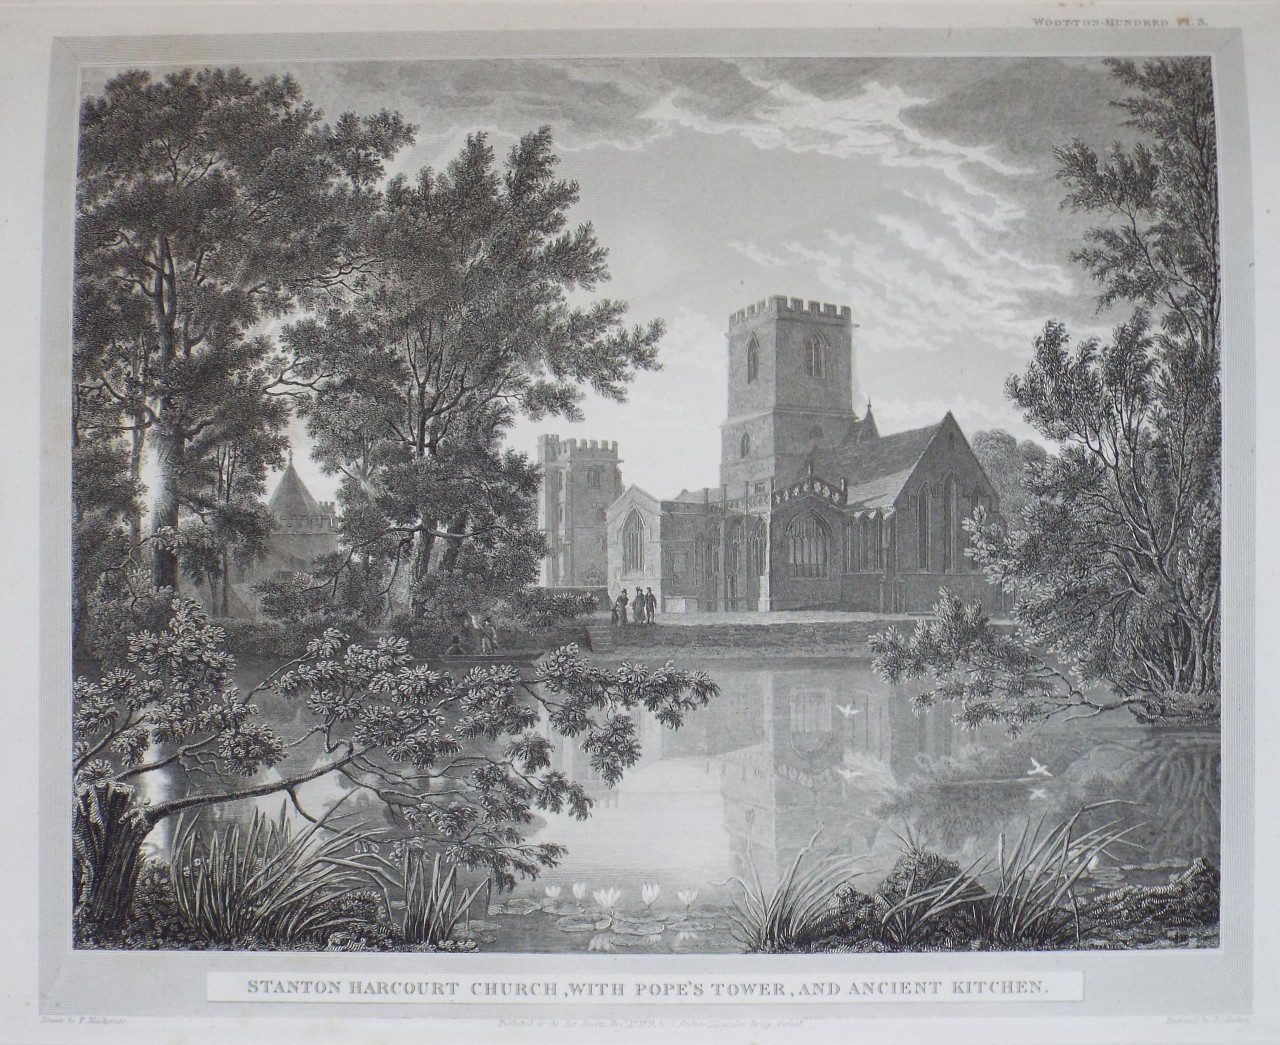 Print - Stanton Harcourt Church, with Pope's Tower, and Ancient Kitchin. - Skelton